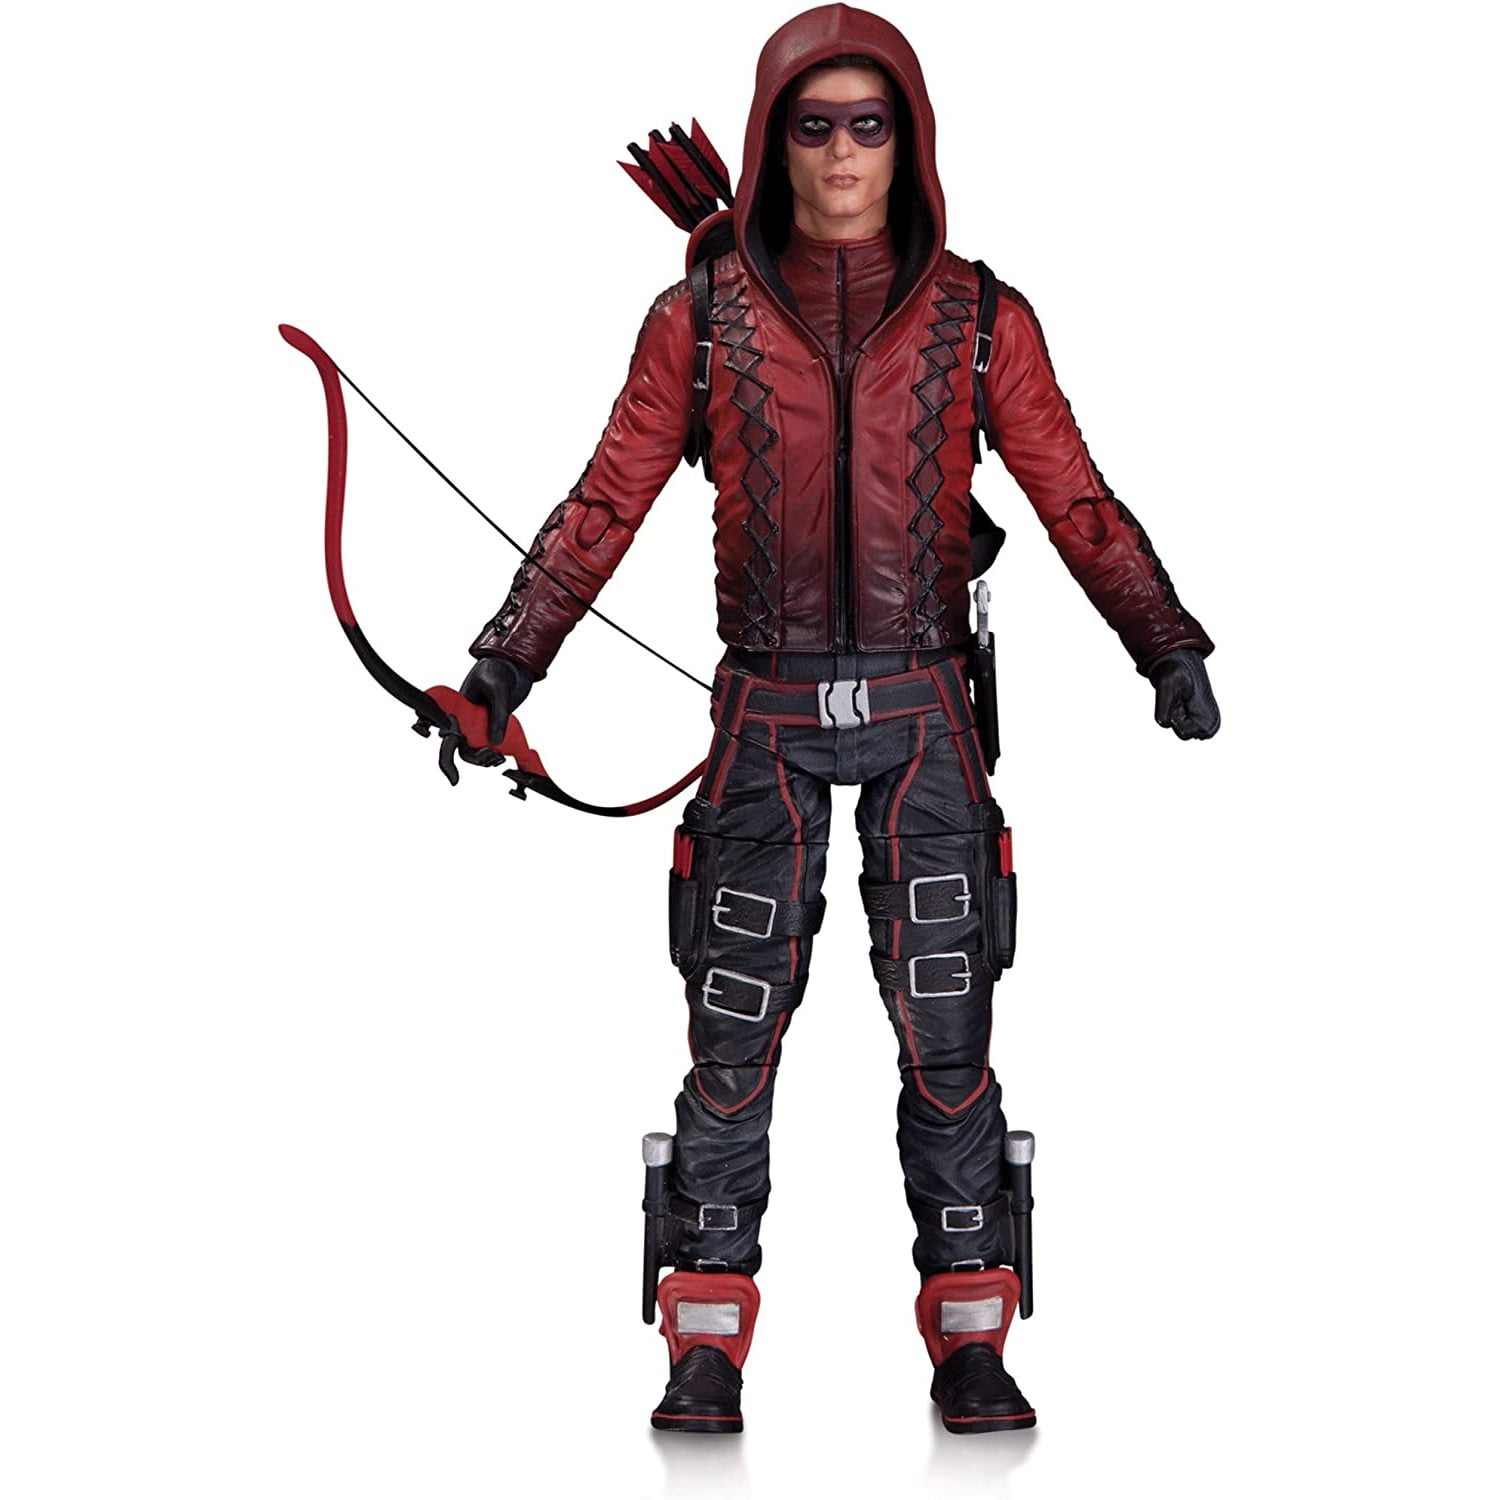 Arrow (TV Show) Arsenal Action Figure, Based on The CW Networks hit series 